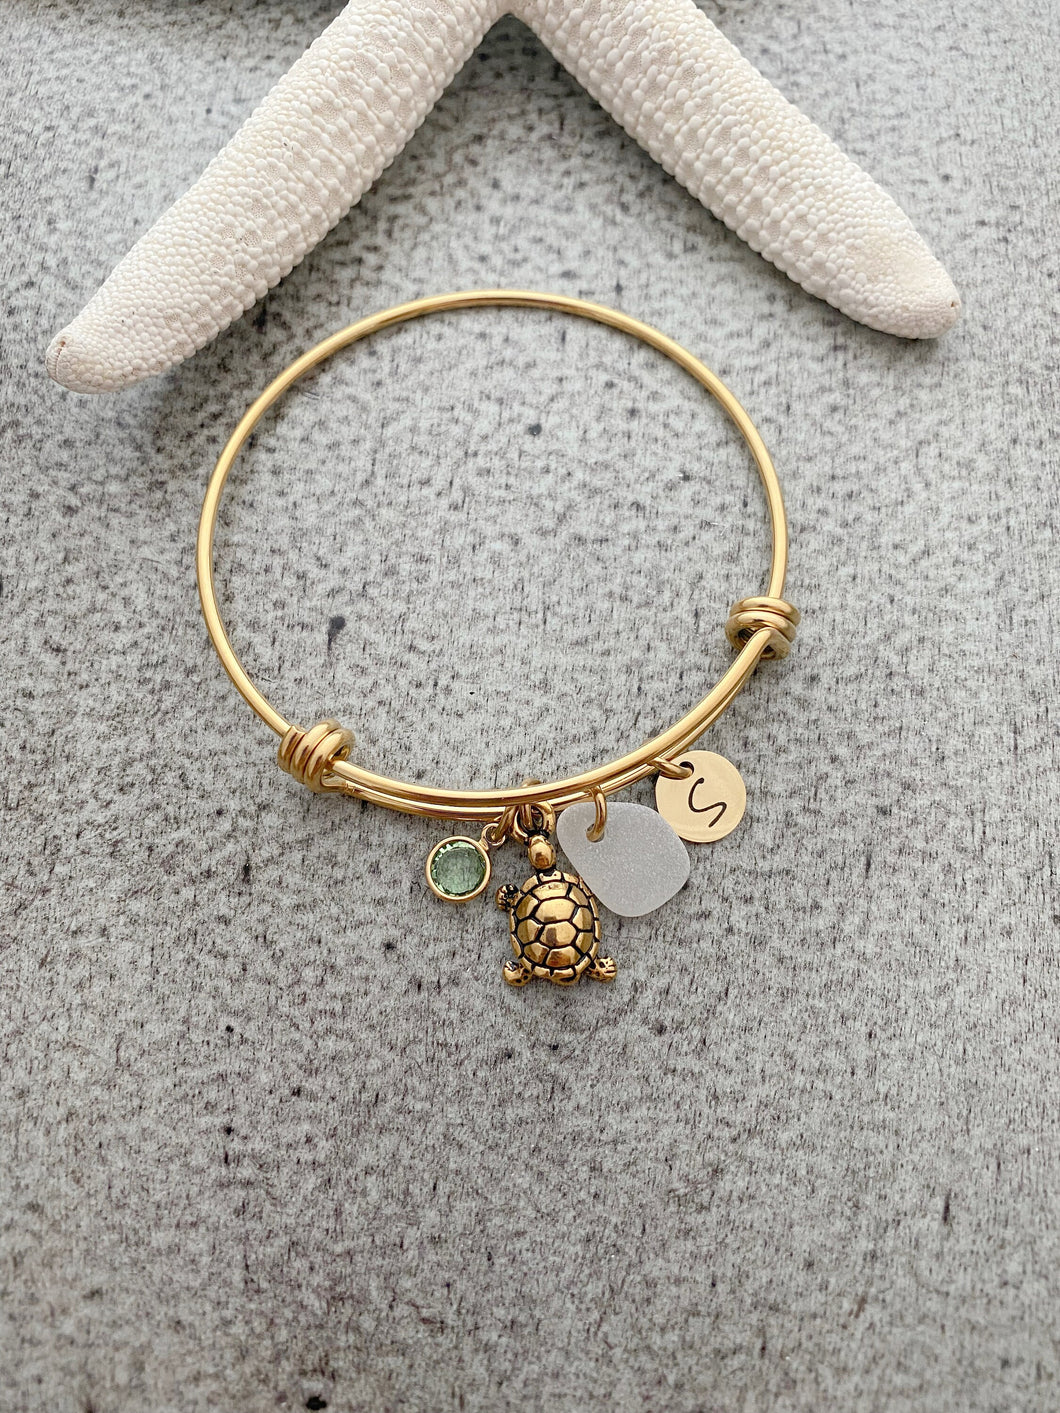 Gold turtle charm bracelet, adjustable bangle bracelet with genuine sea glass personalized initial and crystal birthstone - gift for friend